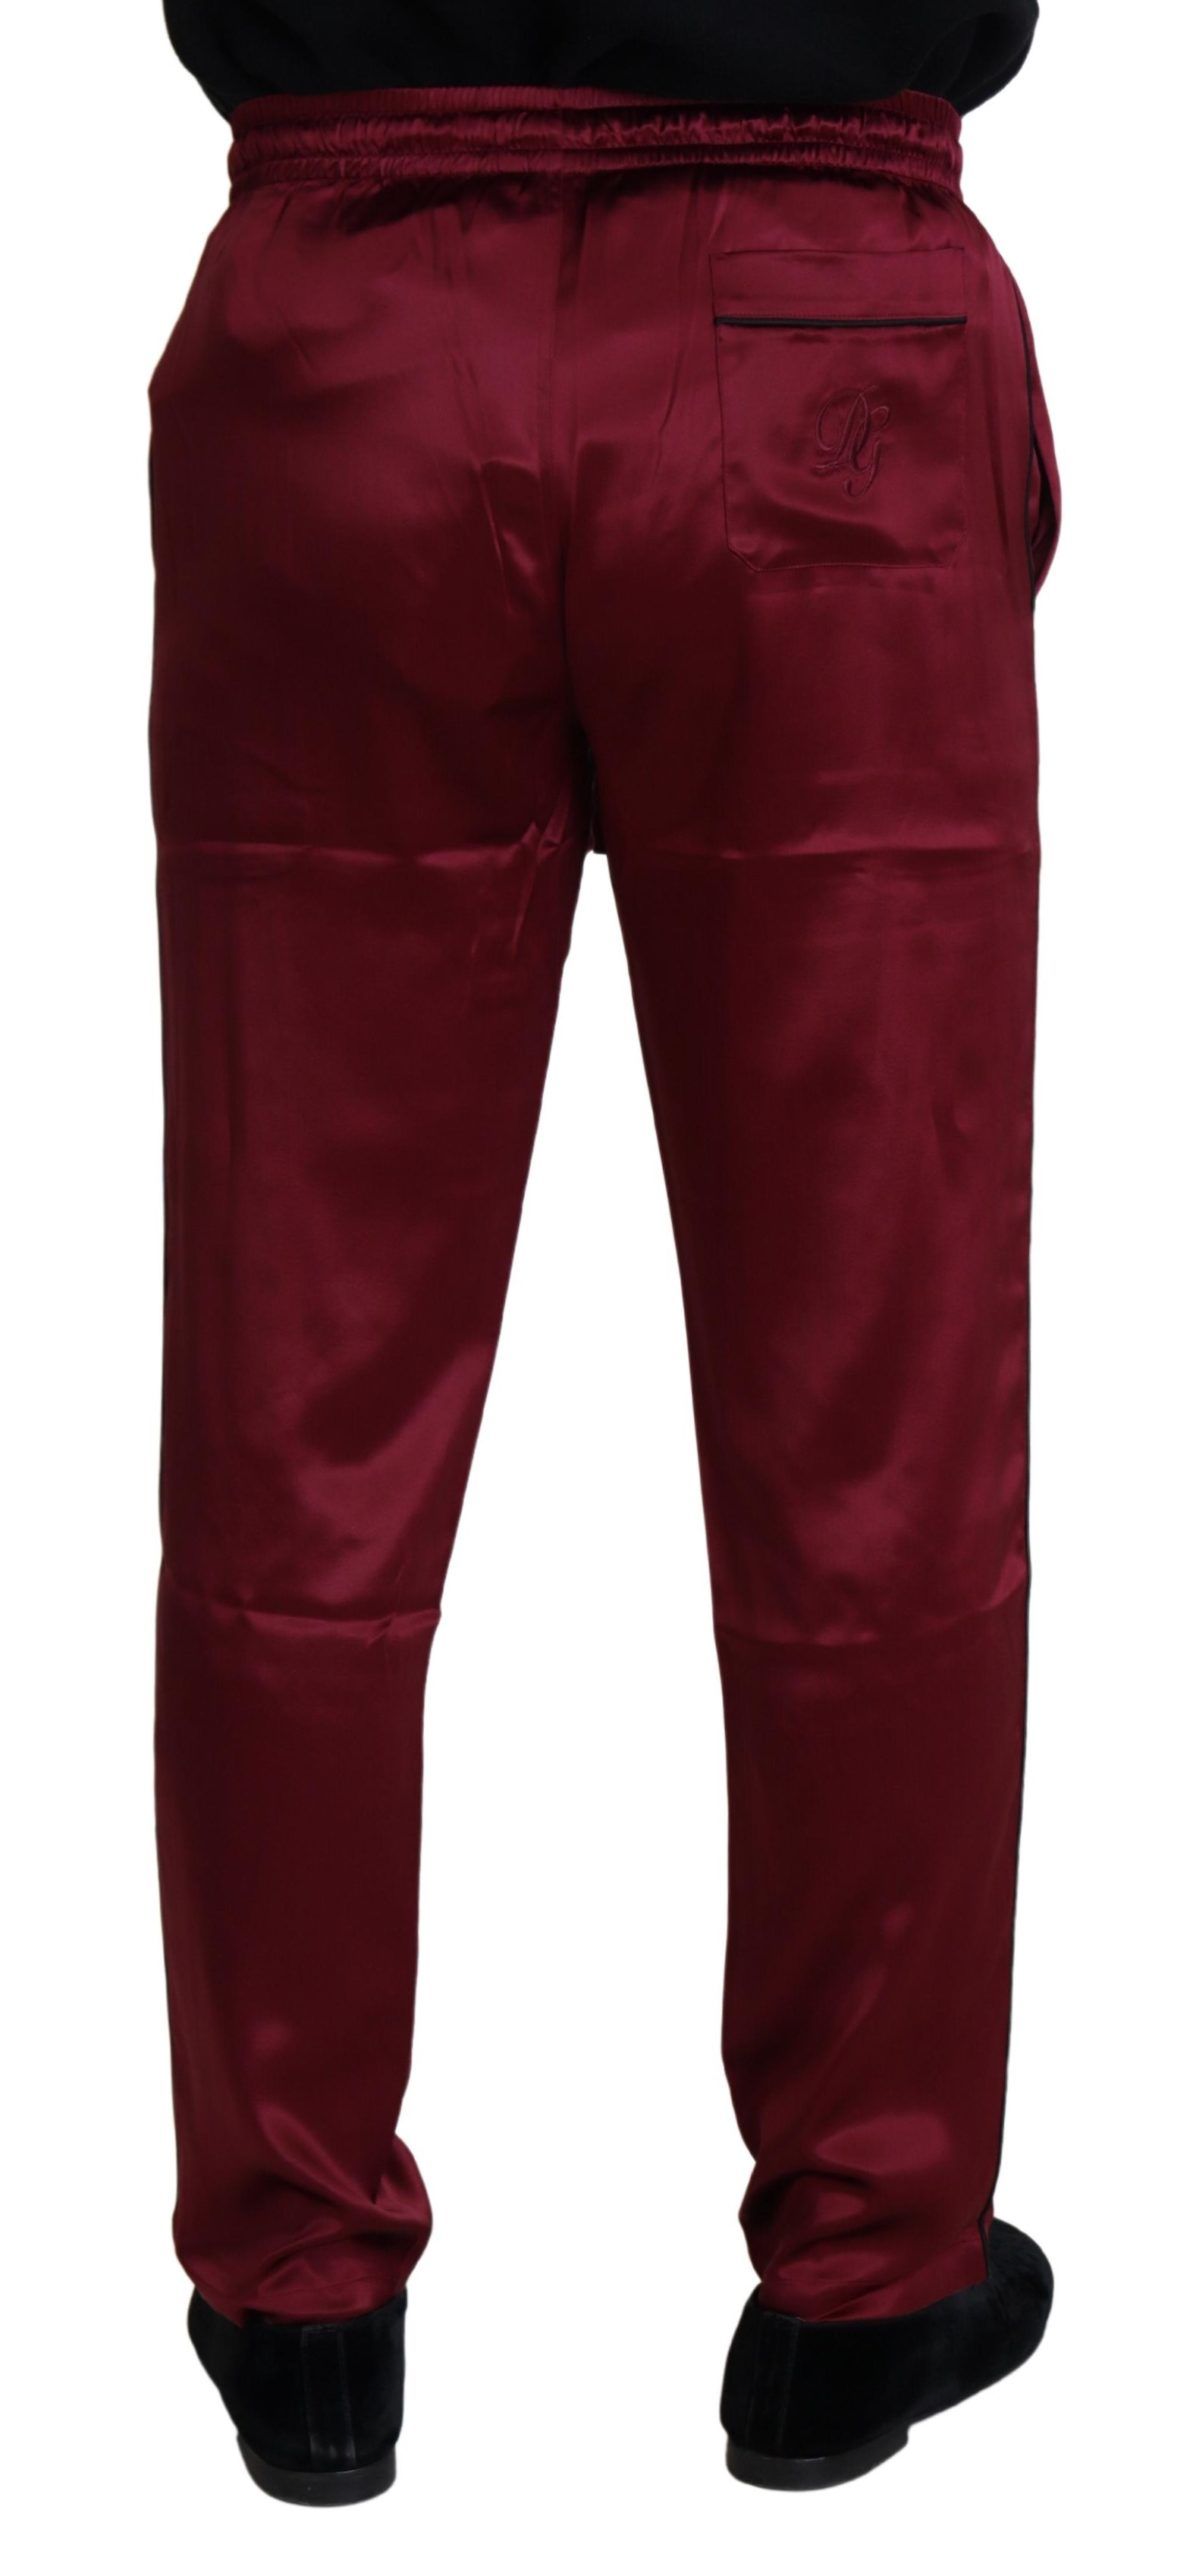 Dolce & Gabbana Bordeaux Silk DG Sleep Lounge Pants - Designed by Dolce & Gabbana Available to Buy at a Discounted Price on Moon Behind The Hill Online Designer Discount Store